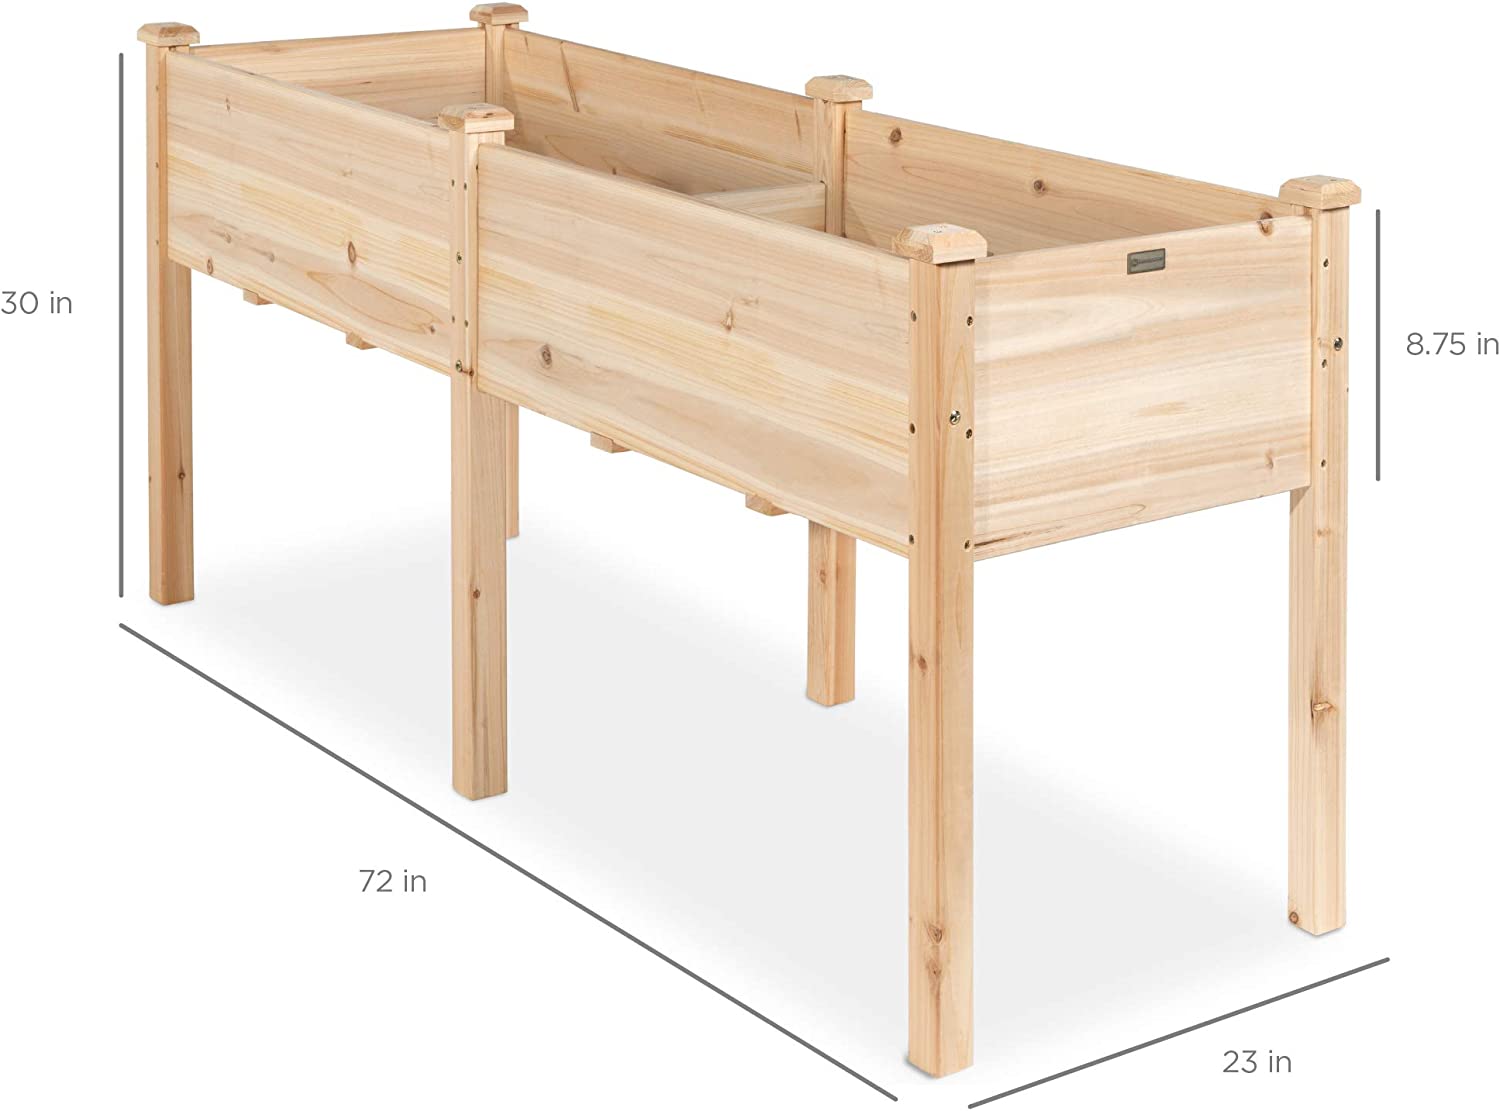 Elevated Wood Planter Box Stand 